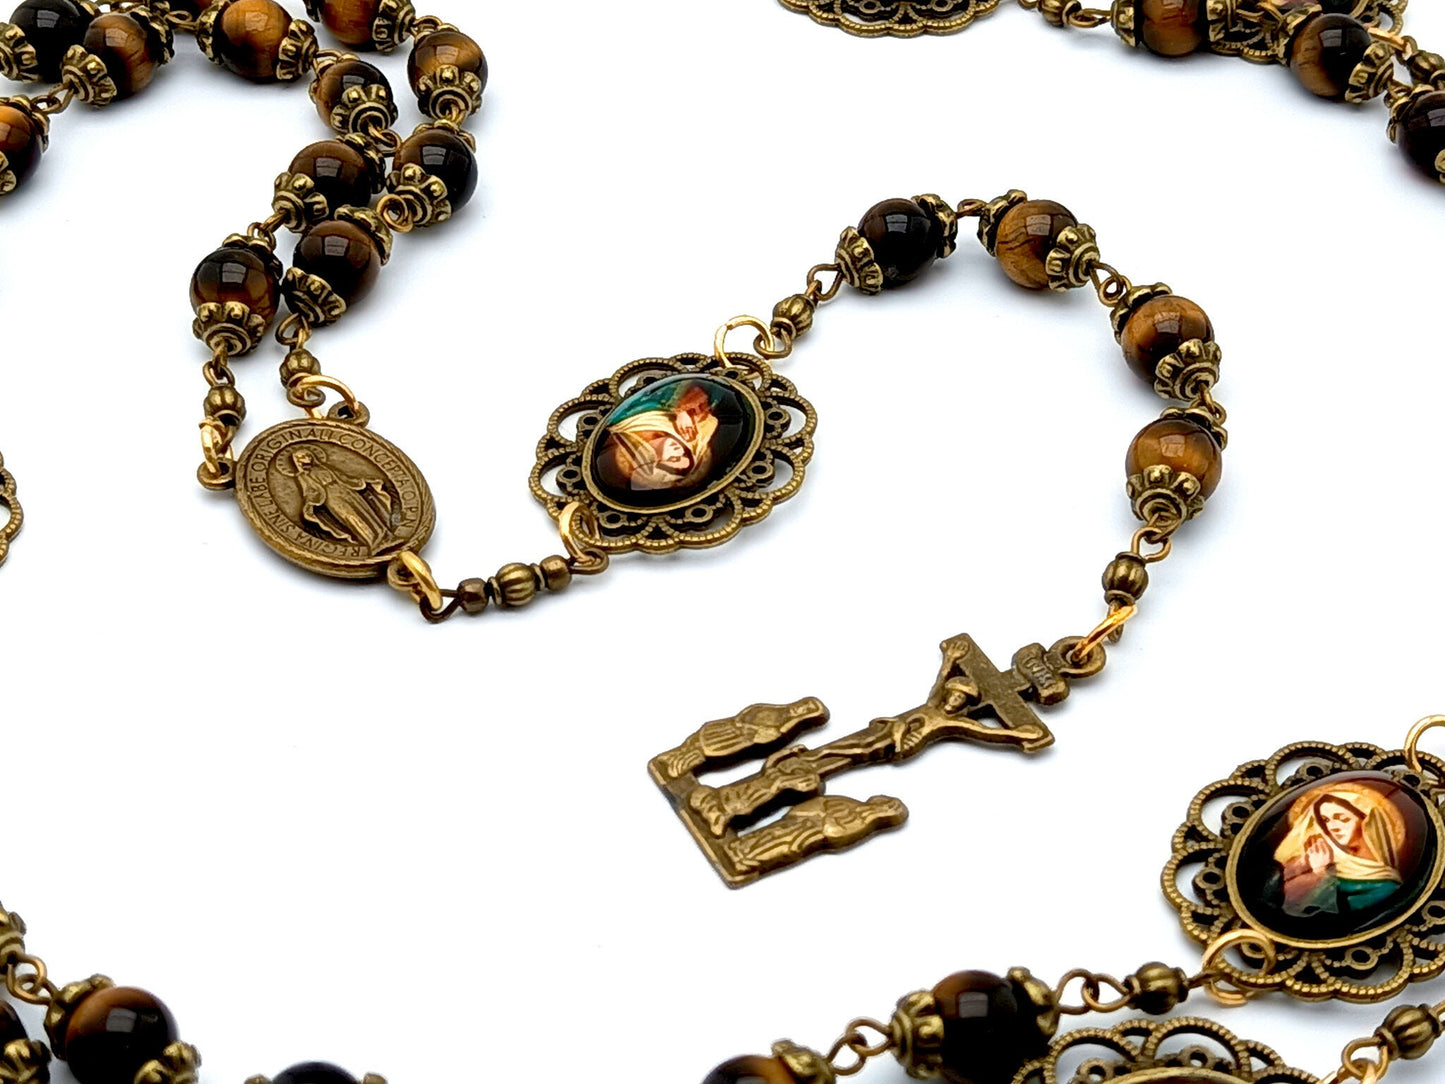 Our Lady of Sorrows unique rosary beads dolor rosary with tigers eye gemstone beads, bronze crucifix, picture medals and centre medal.